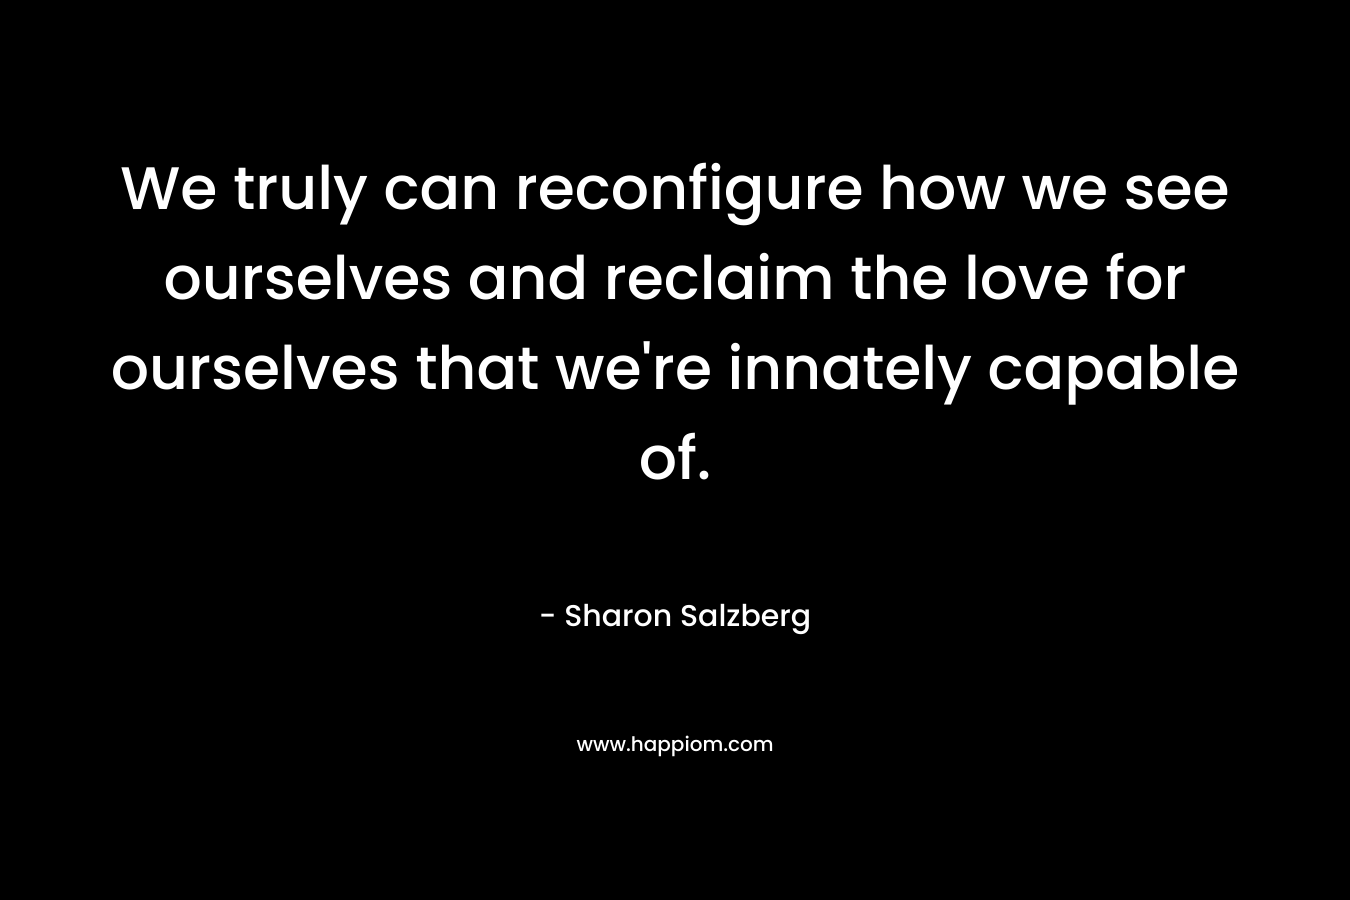 We truly can reconfigure how we see ourselves and reclaim the love for ourselves that we're innately capable of.